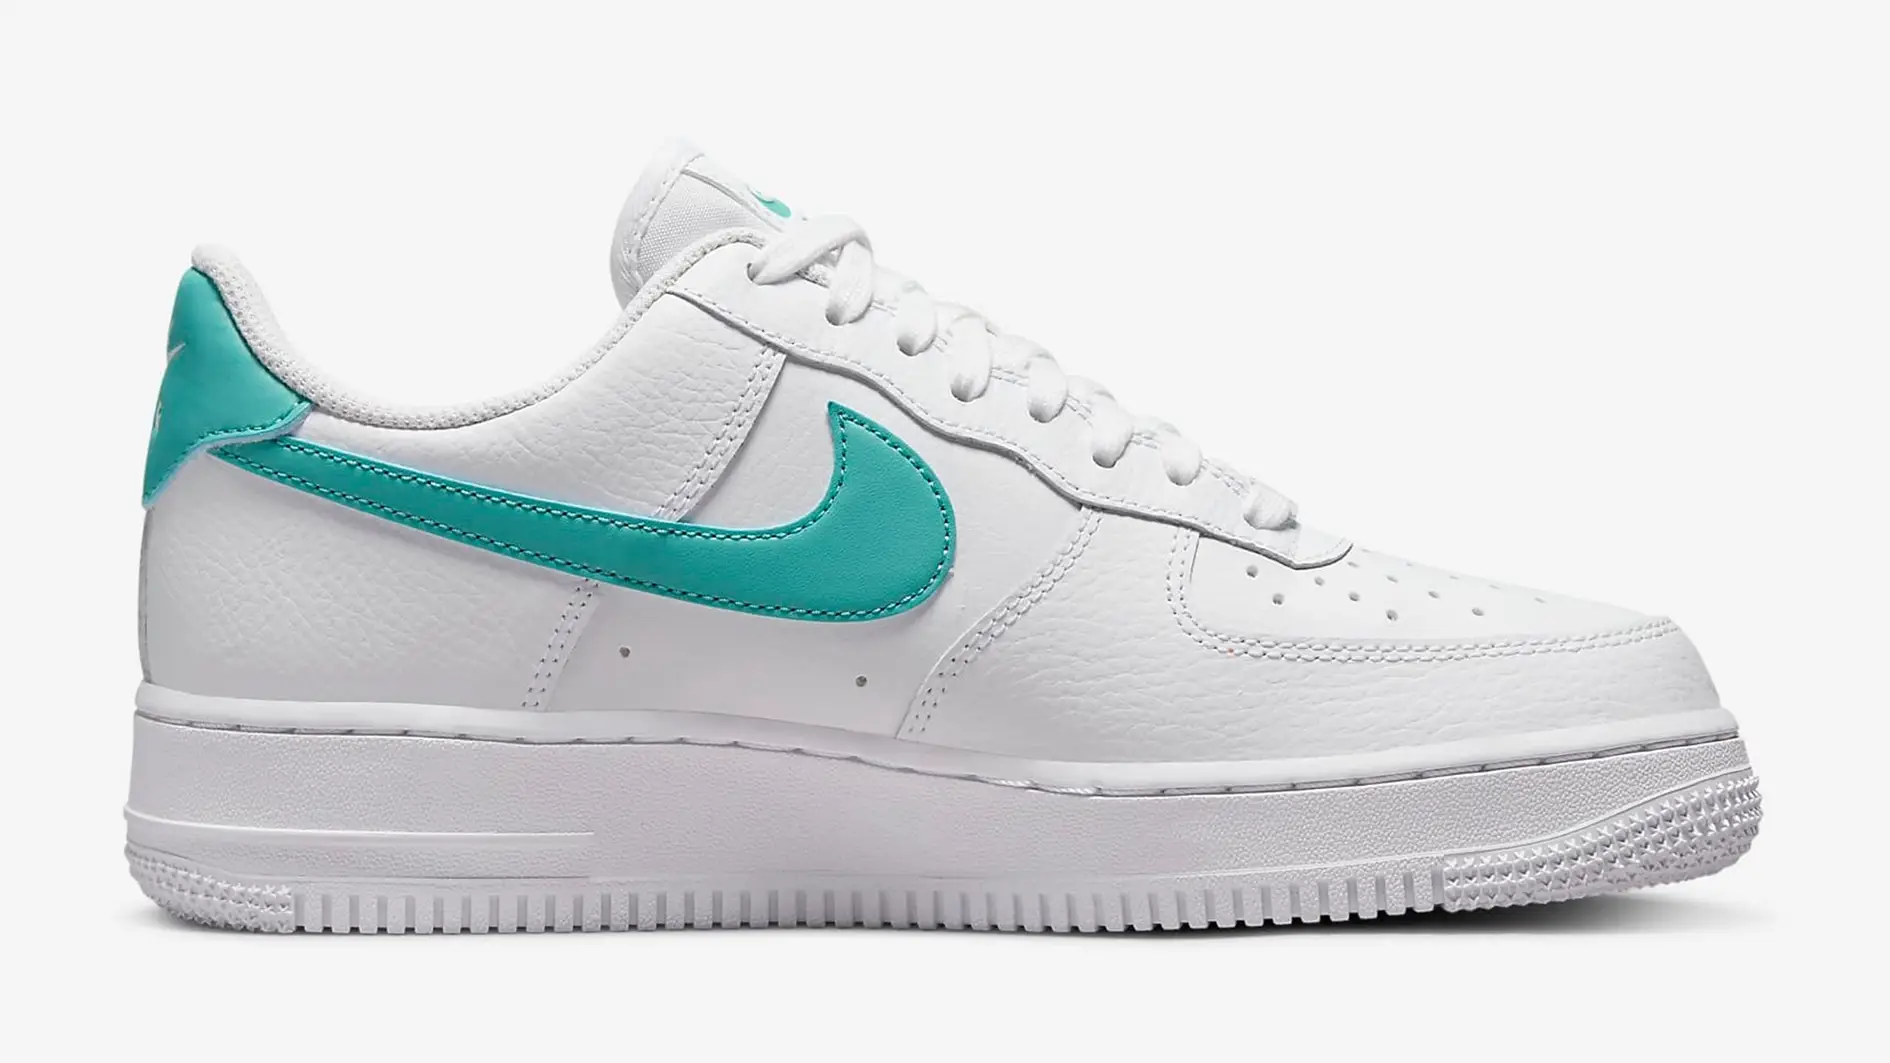 The Nike Air Force 1 